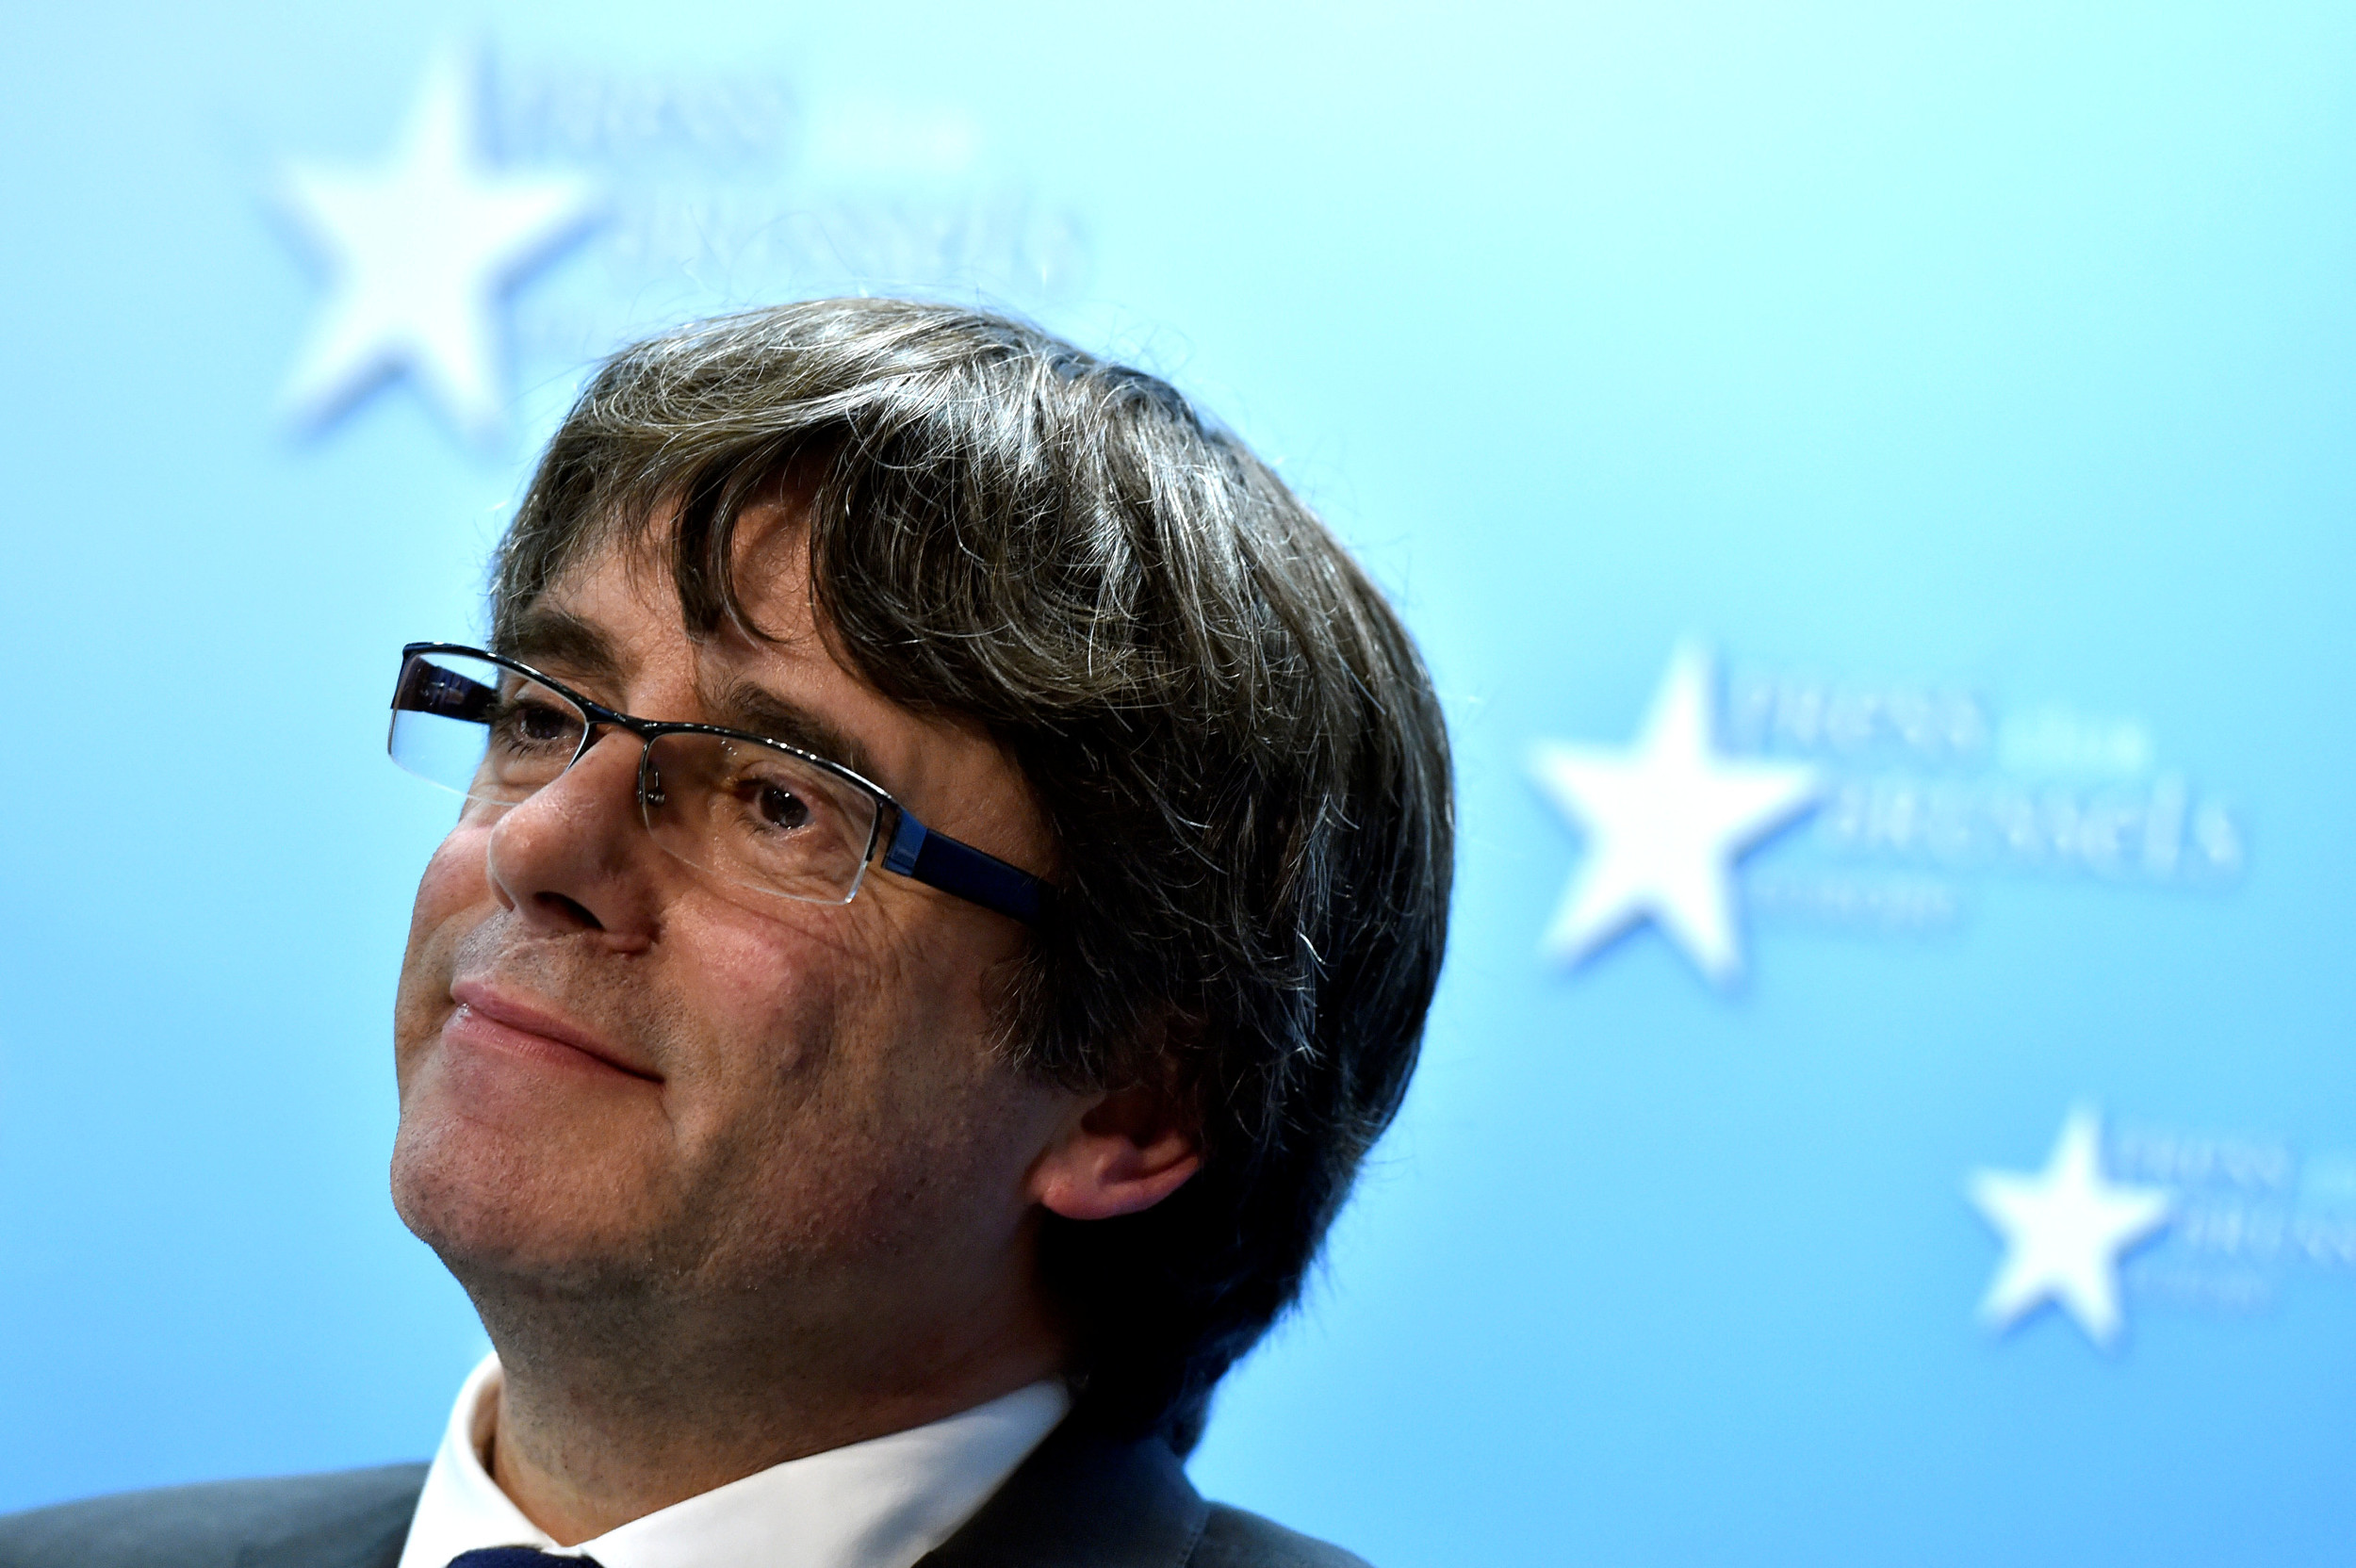 Puigdemont at the press conference in Brussels on October 31 (by ACN)